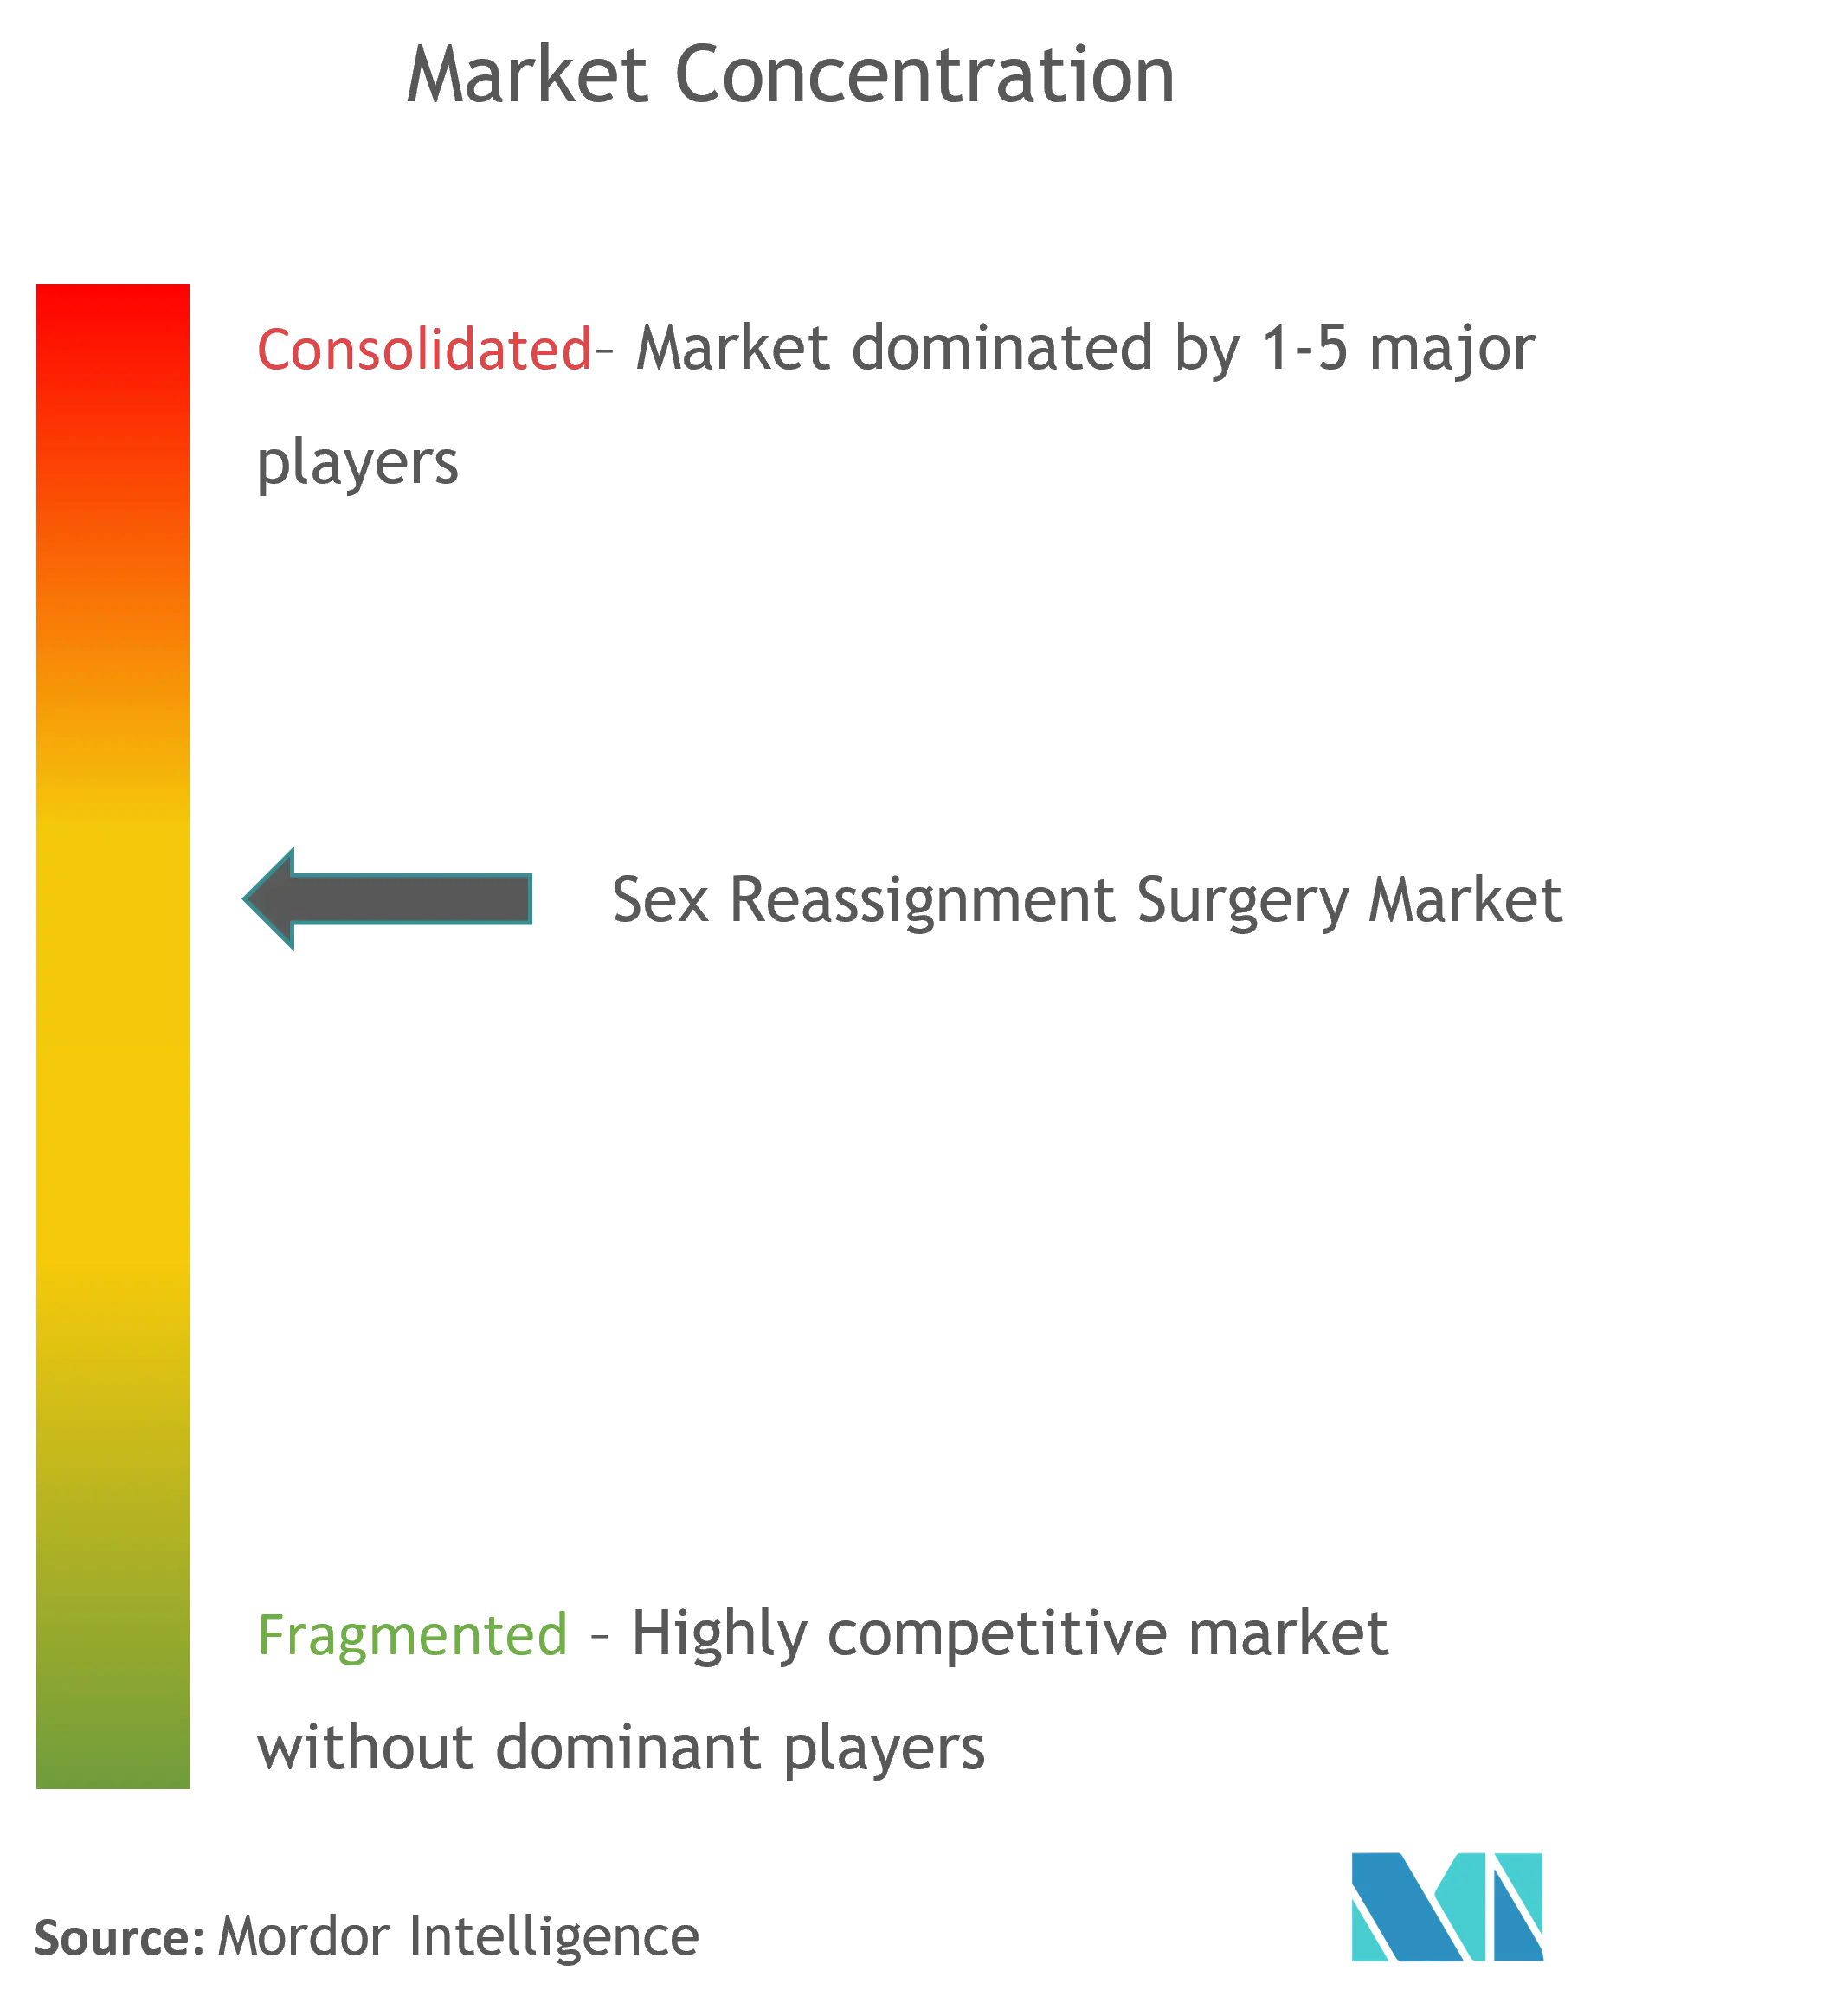 Sex Reassignment Surgery Market Concentration